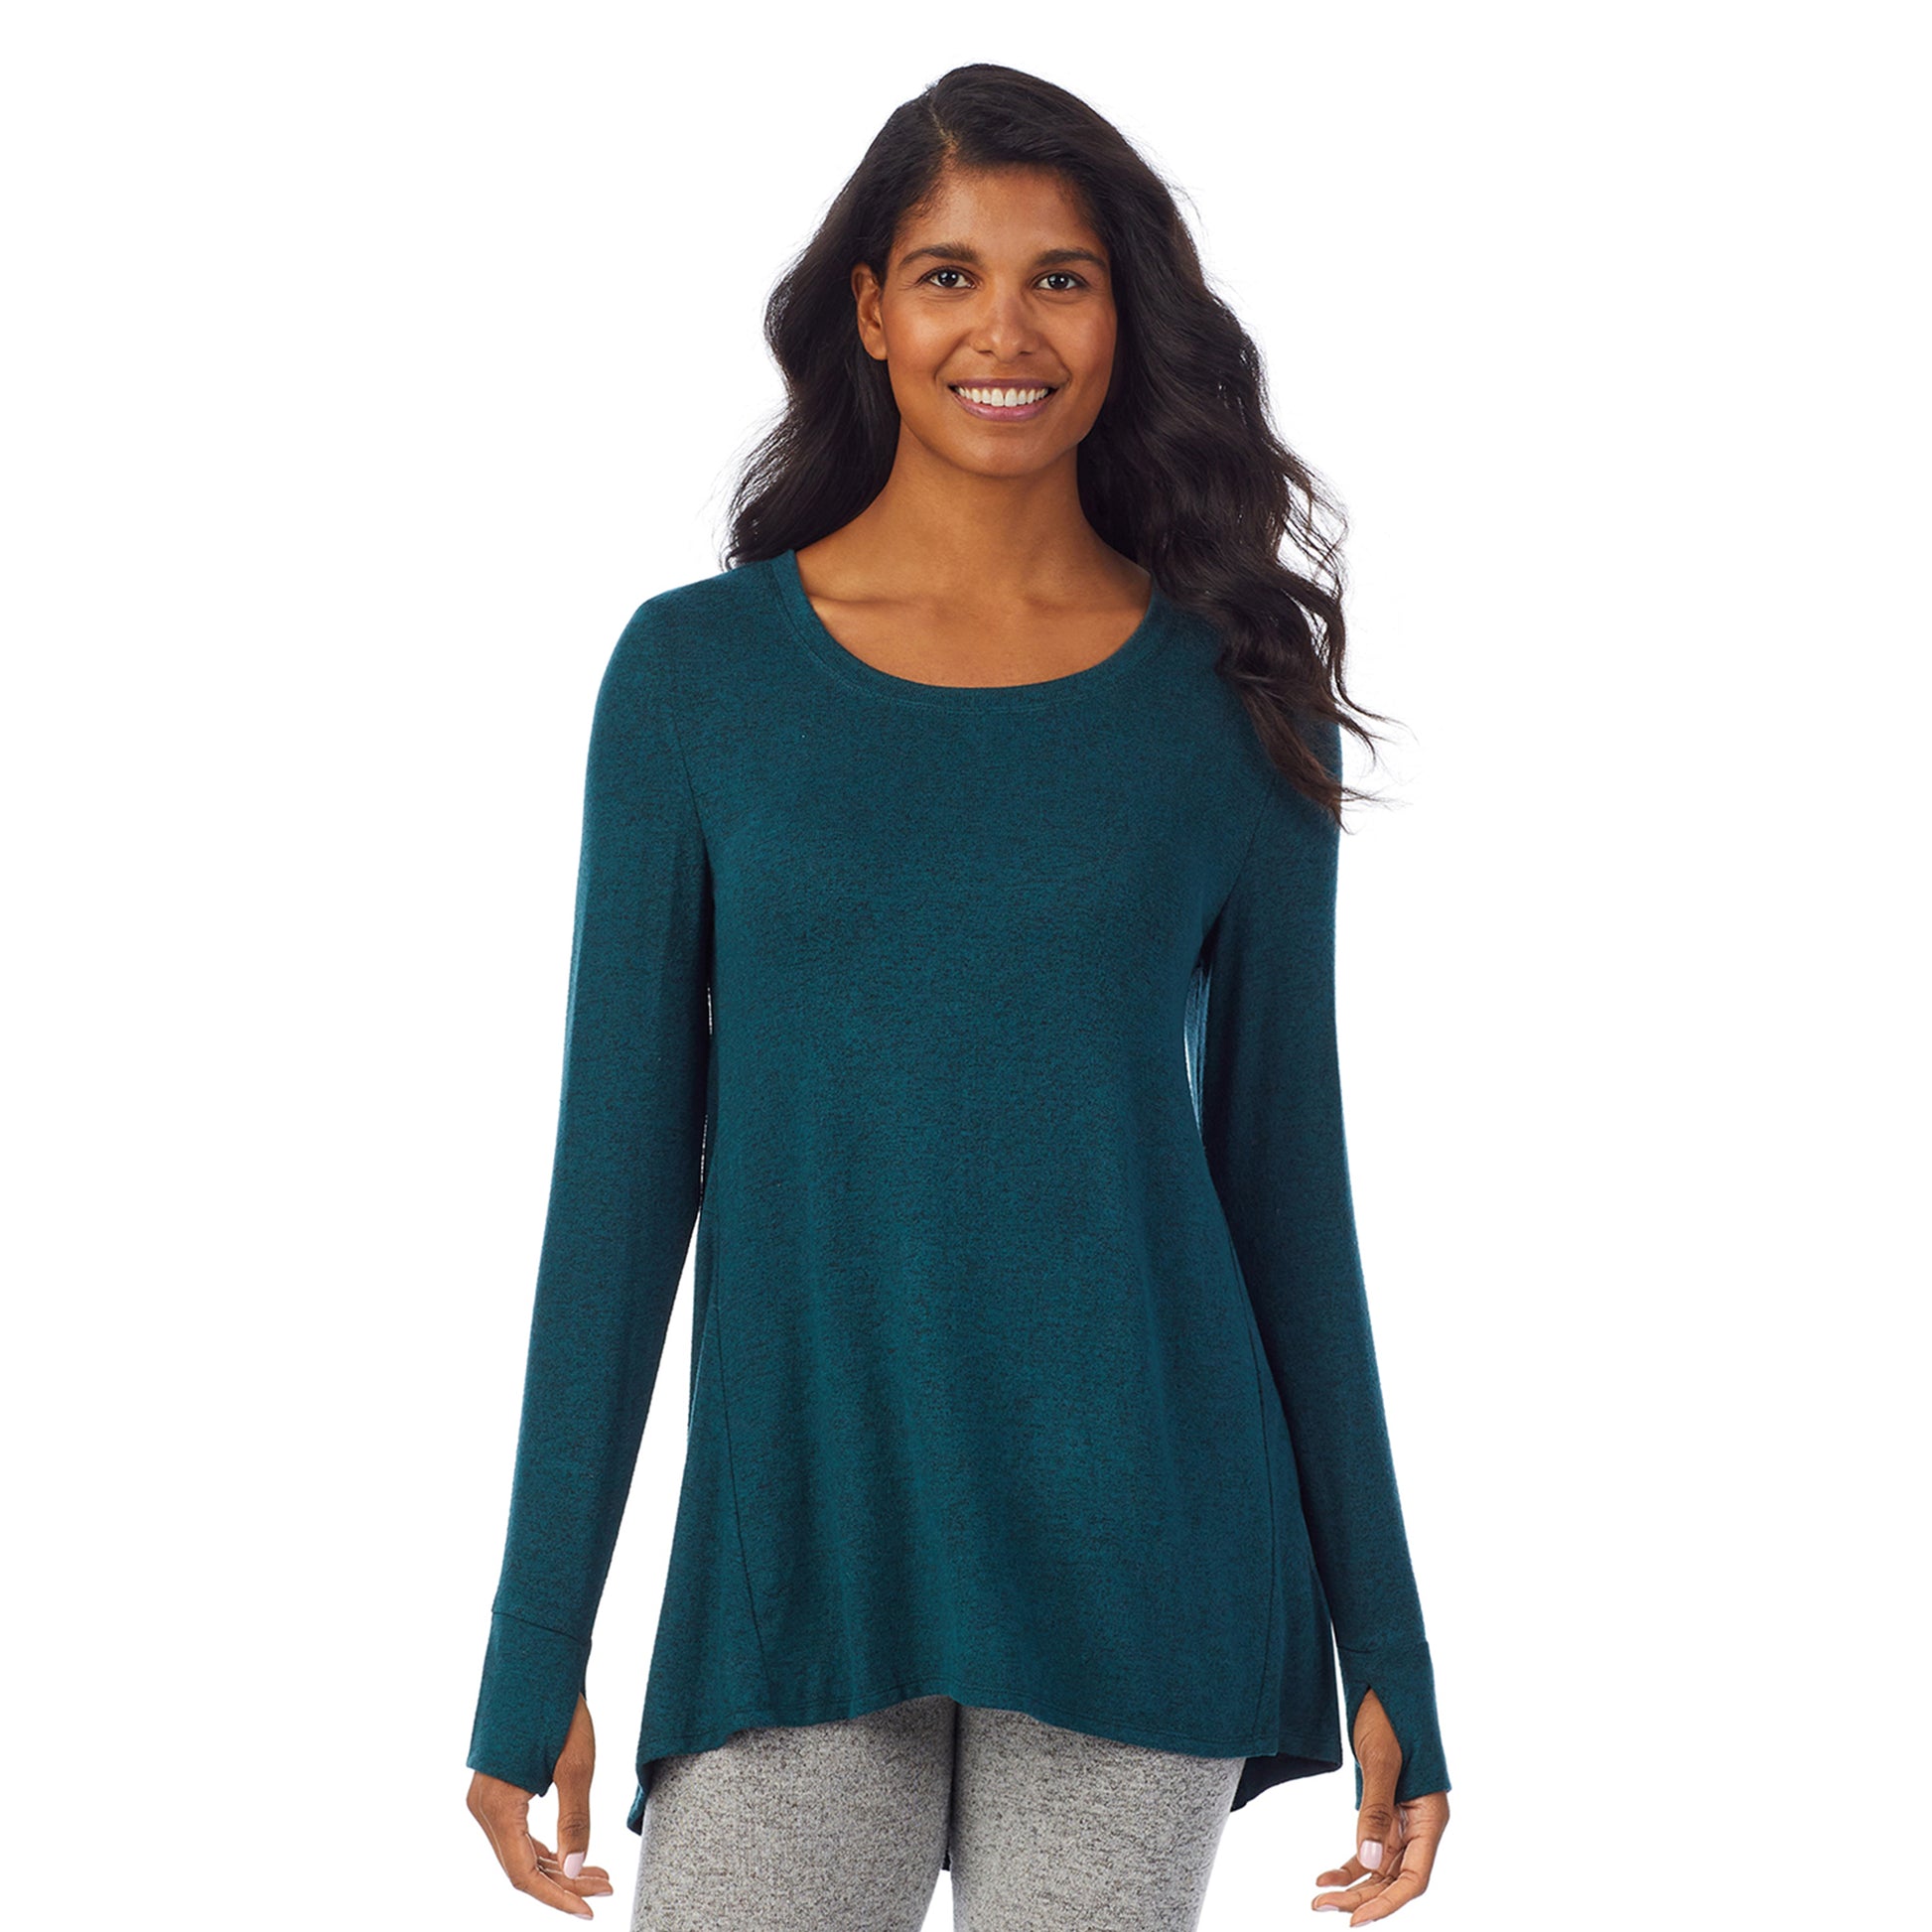 Marled Viridian Green; Model is wearing size S. She is 5’10”, Bust 34”, Waist 24”, Hips 34”. @A lady wearing a marled viridian green long sleeve tunic.